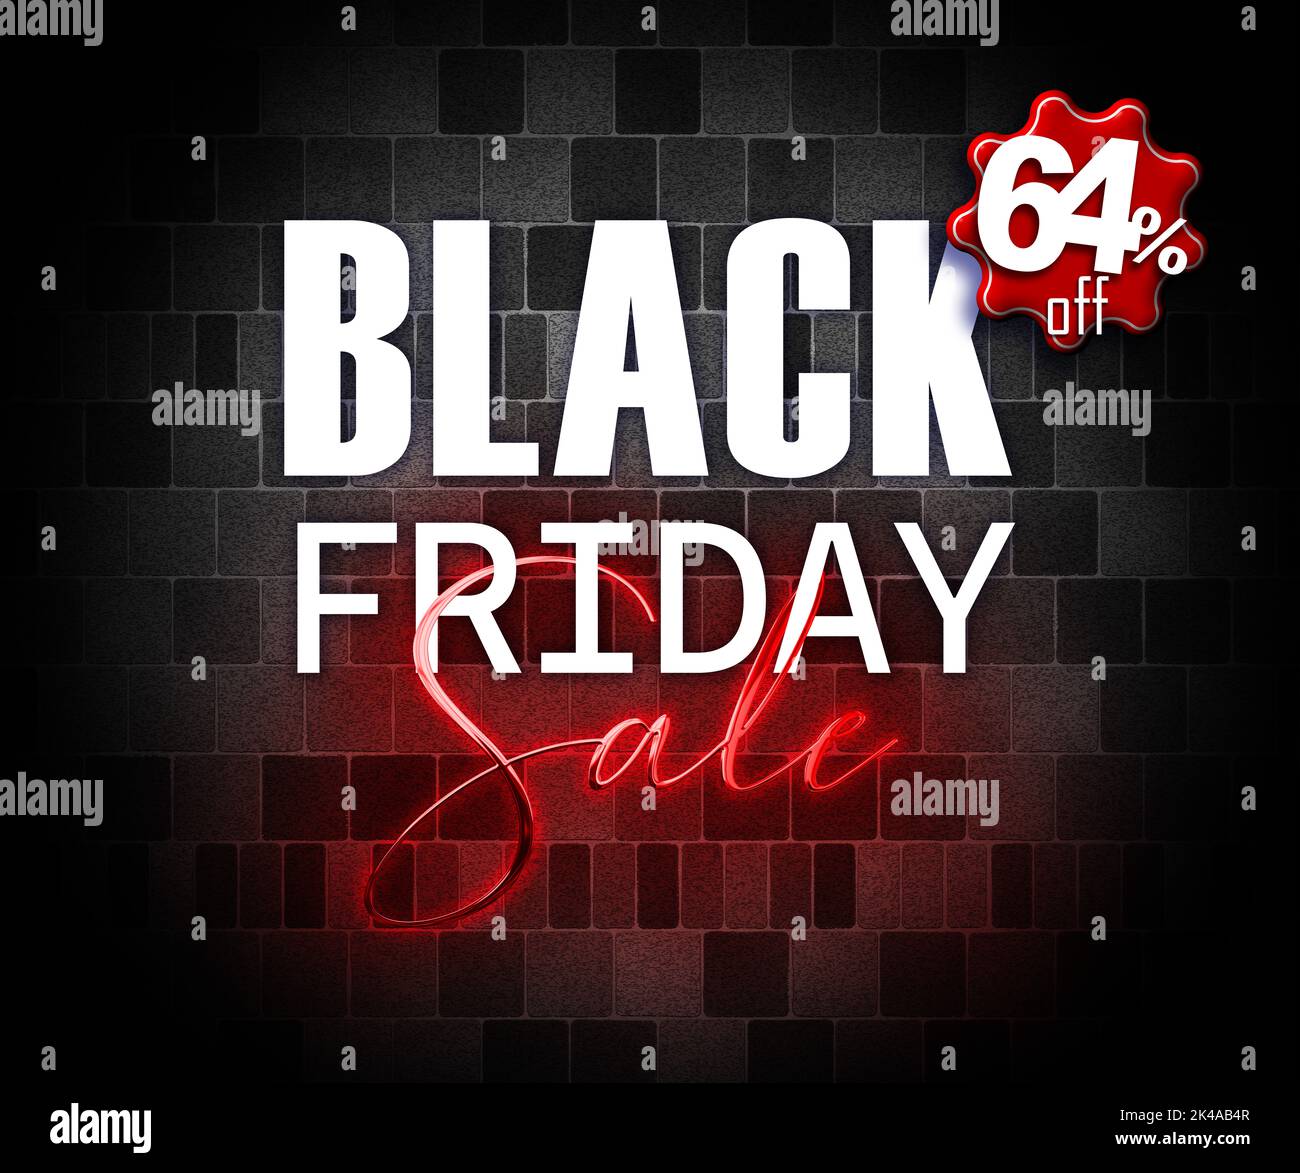 illustration with 3d elements black friday promotion banner 64 percent off sales increase Stock Photo